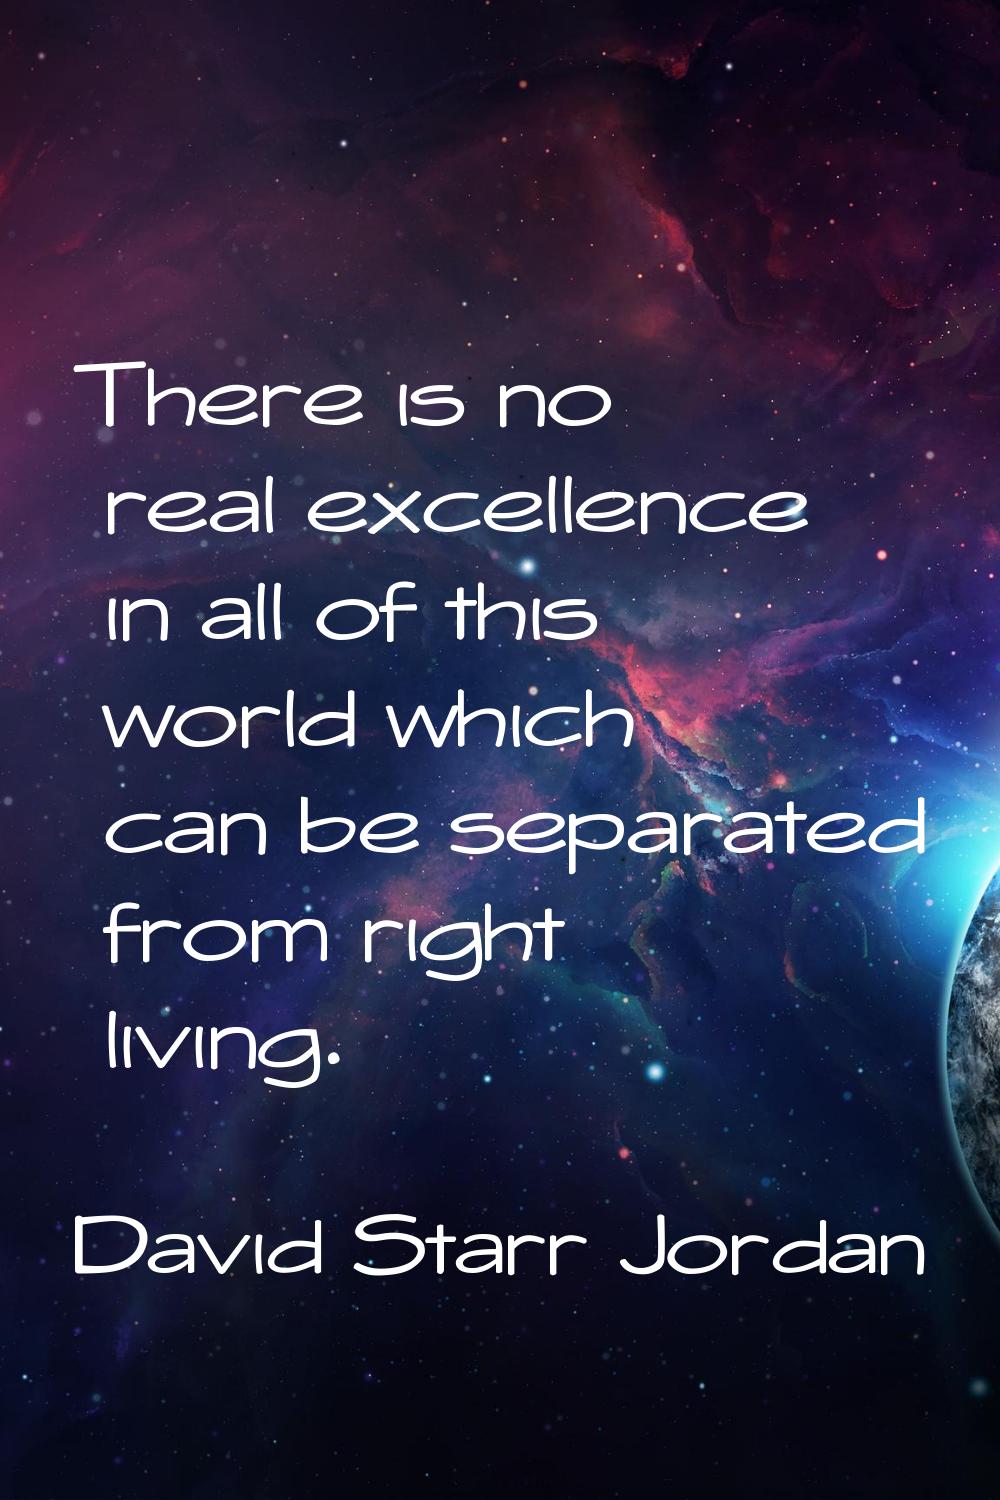 There is no real excellence in all of this world which can be separated from right living.